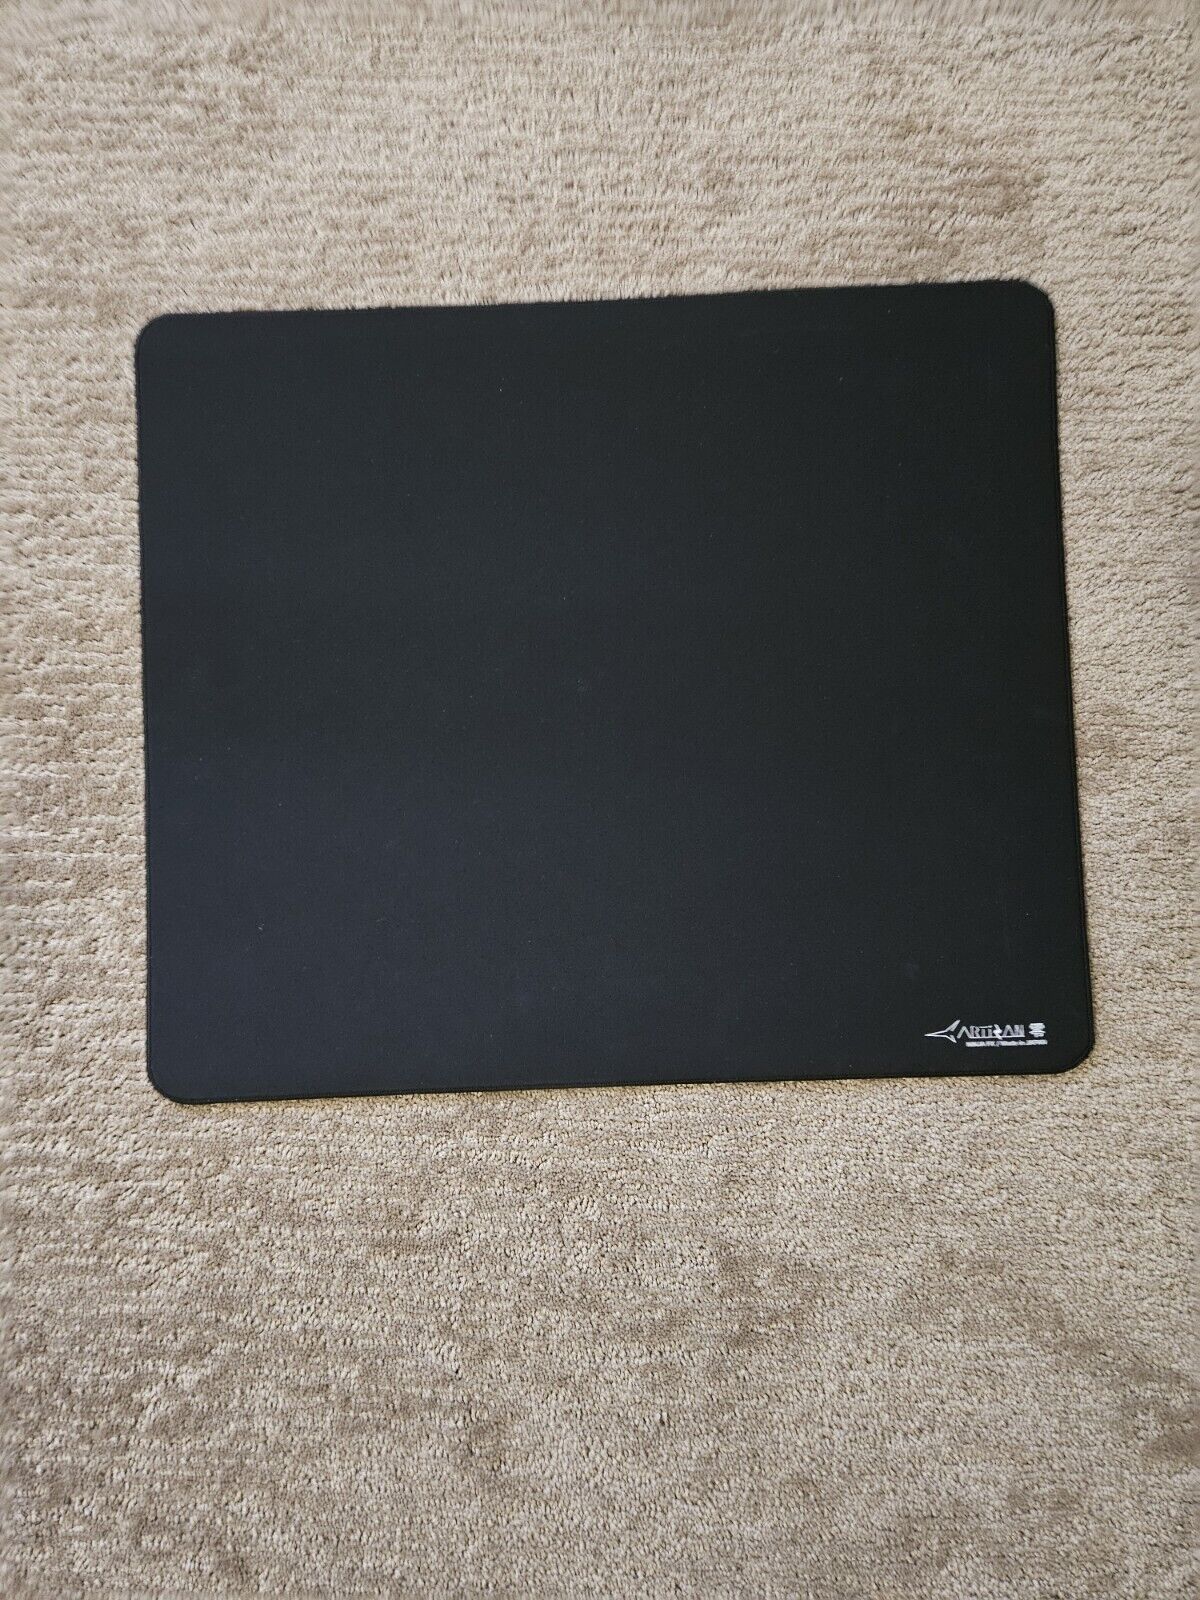 Artisan Zero FX Soft Knitted Fabric Mouse Pad - Black, Size XL